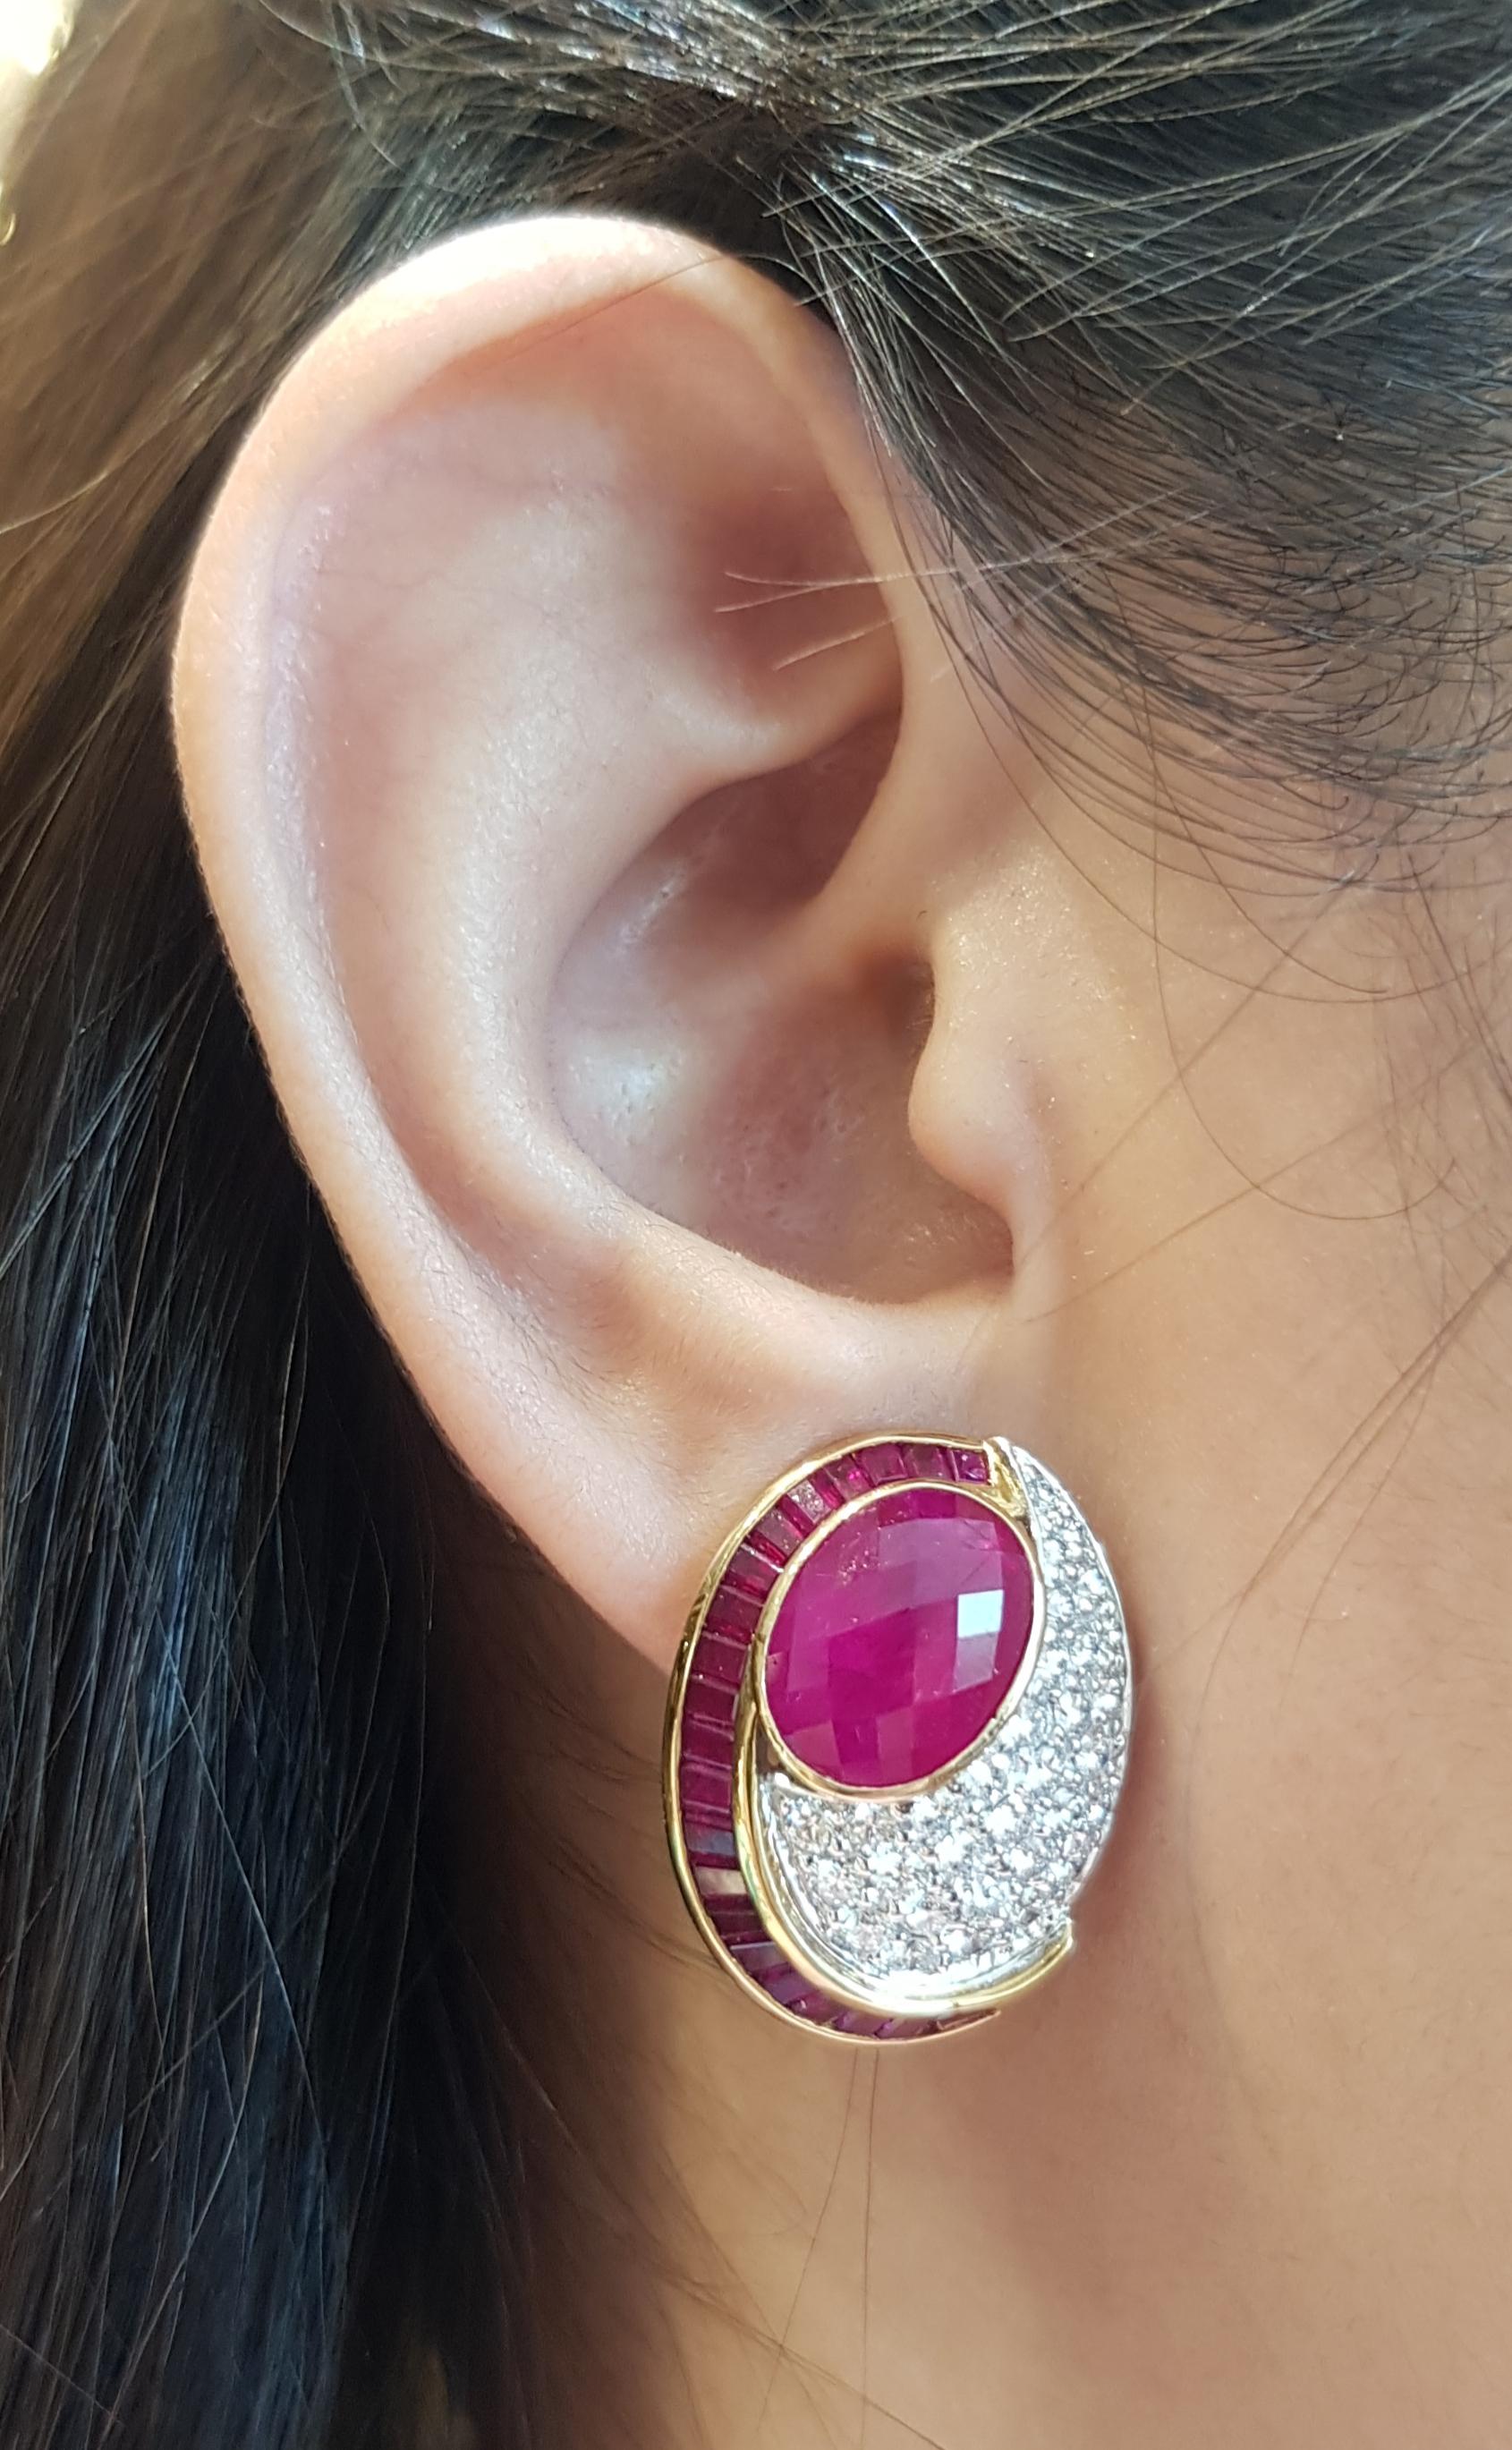 Ruby 5.94 carats (center) with Ruby 4.41 carats and Diamond 2.03 carats Earrings set in 18 Karat Gold Settings

Width:  2.0 cm 
Length: 2.5 cm
Total Weight: 17.41 grams

